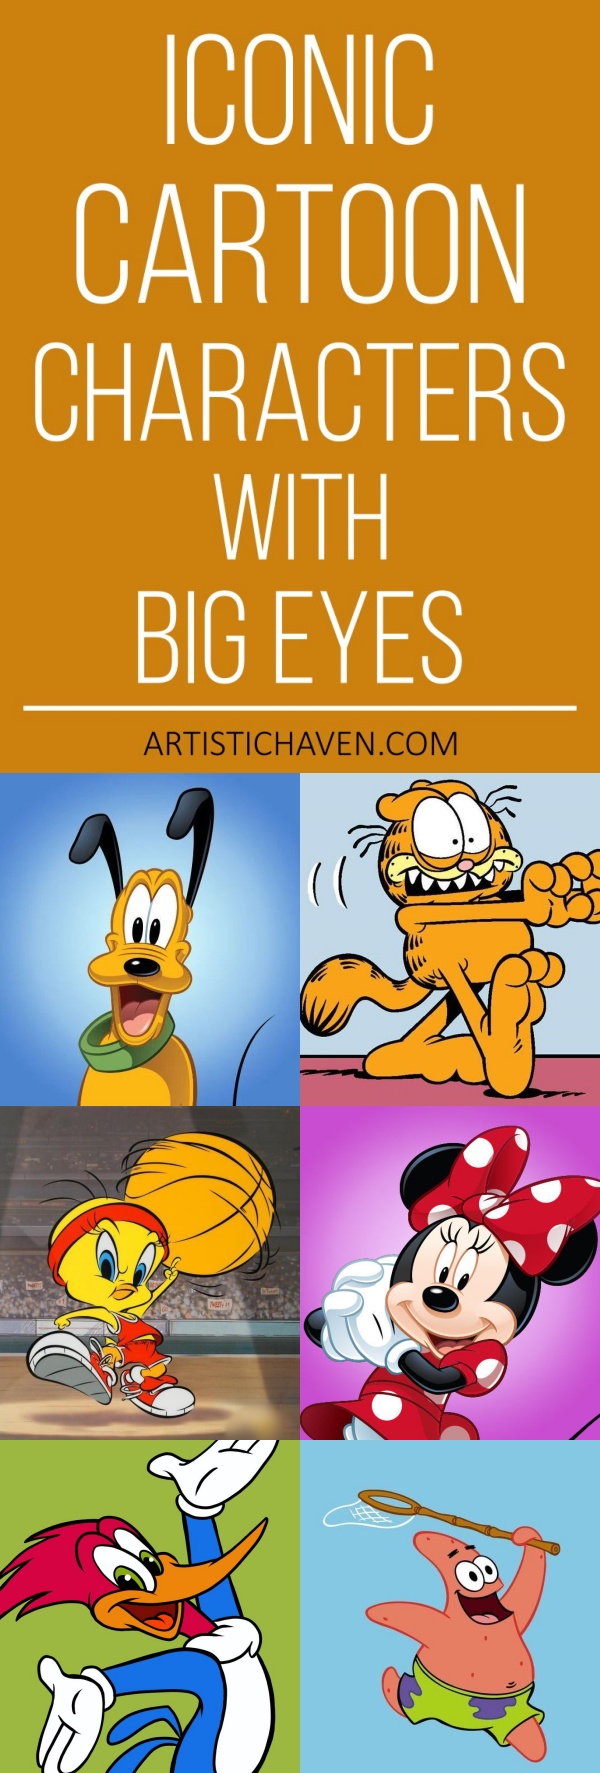 60 Iconic Cartoon Characters With Big Eyes – Artistic Haven